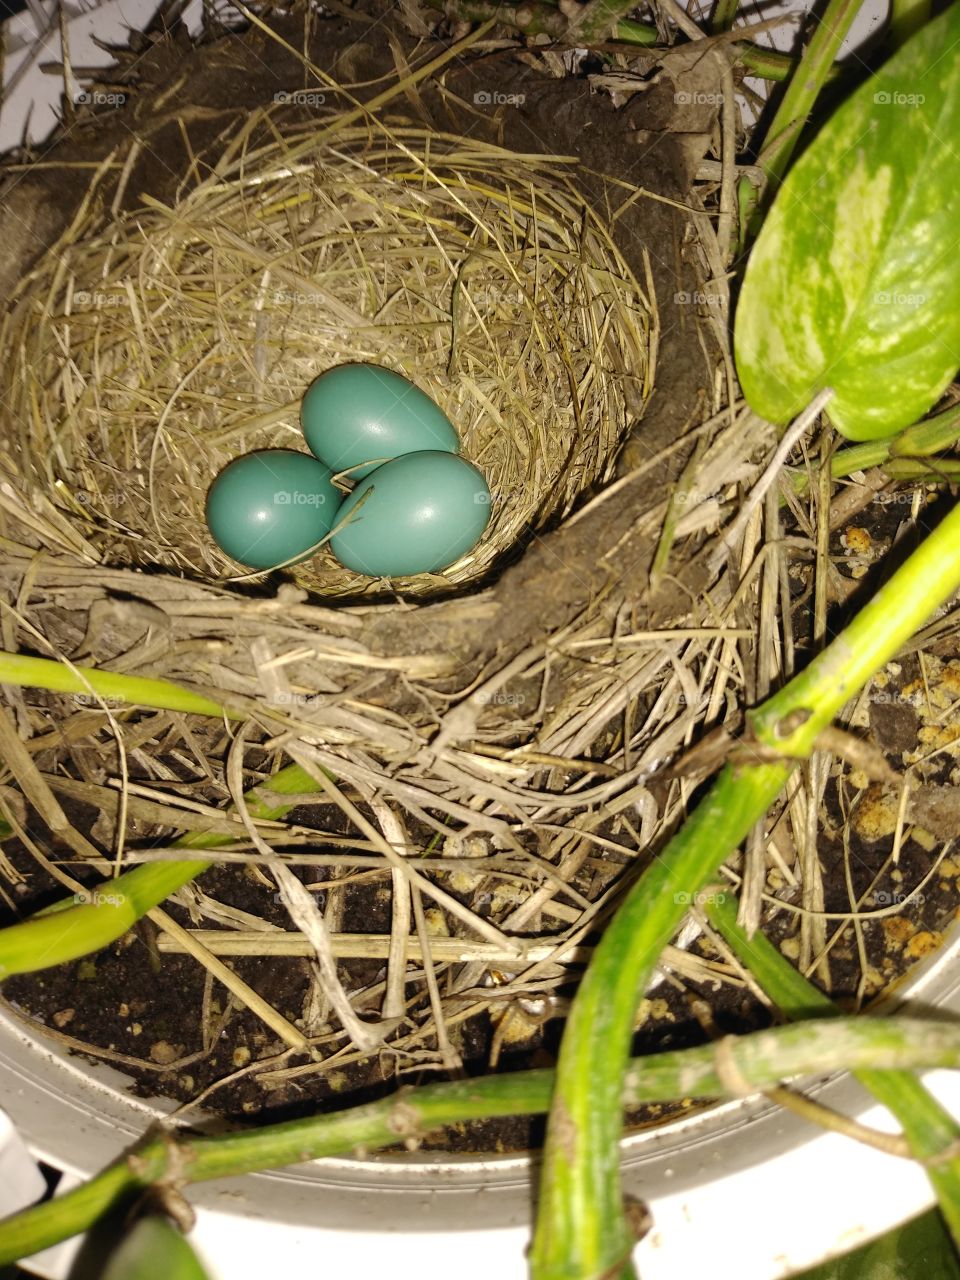 now 3 eggs in my plant